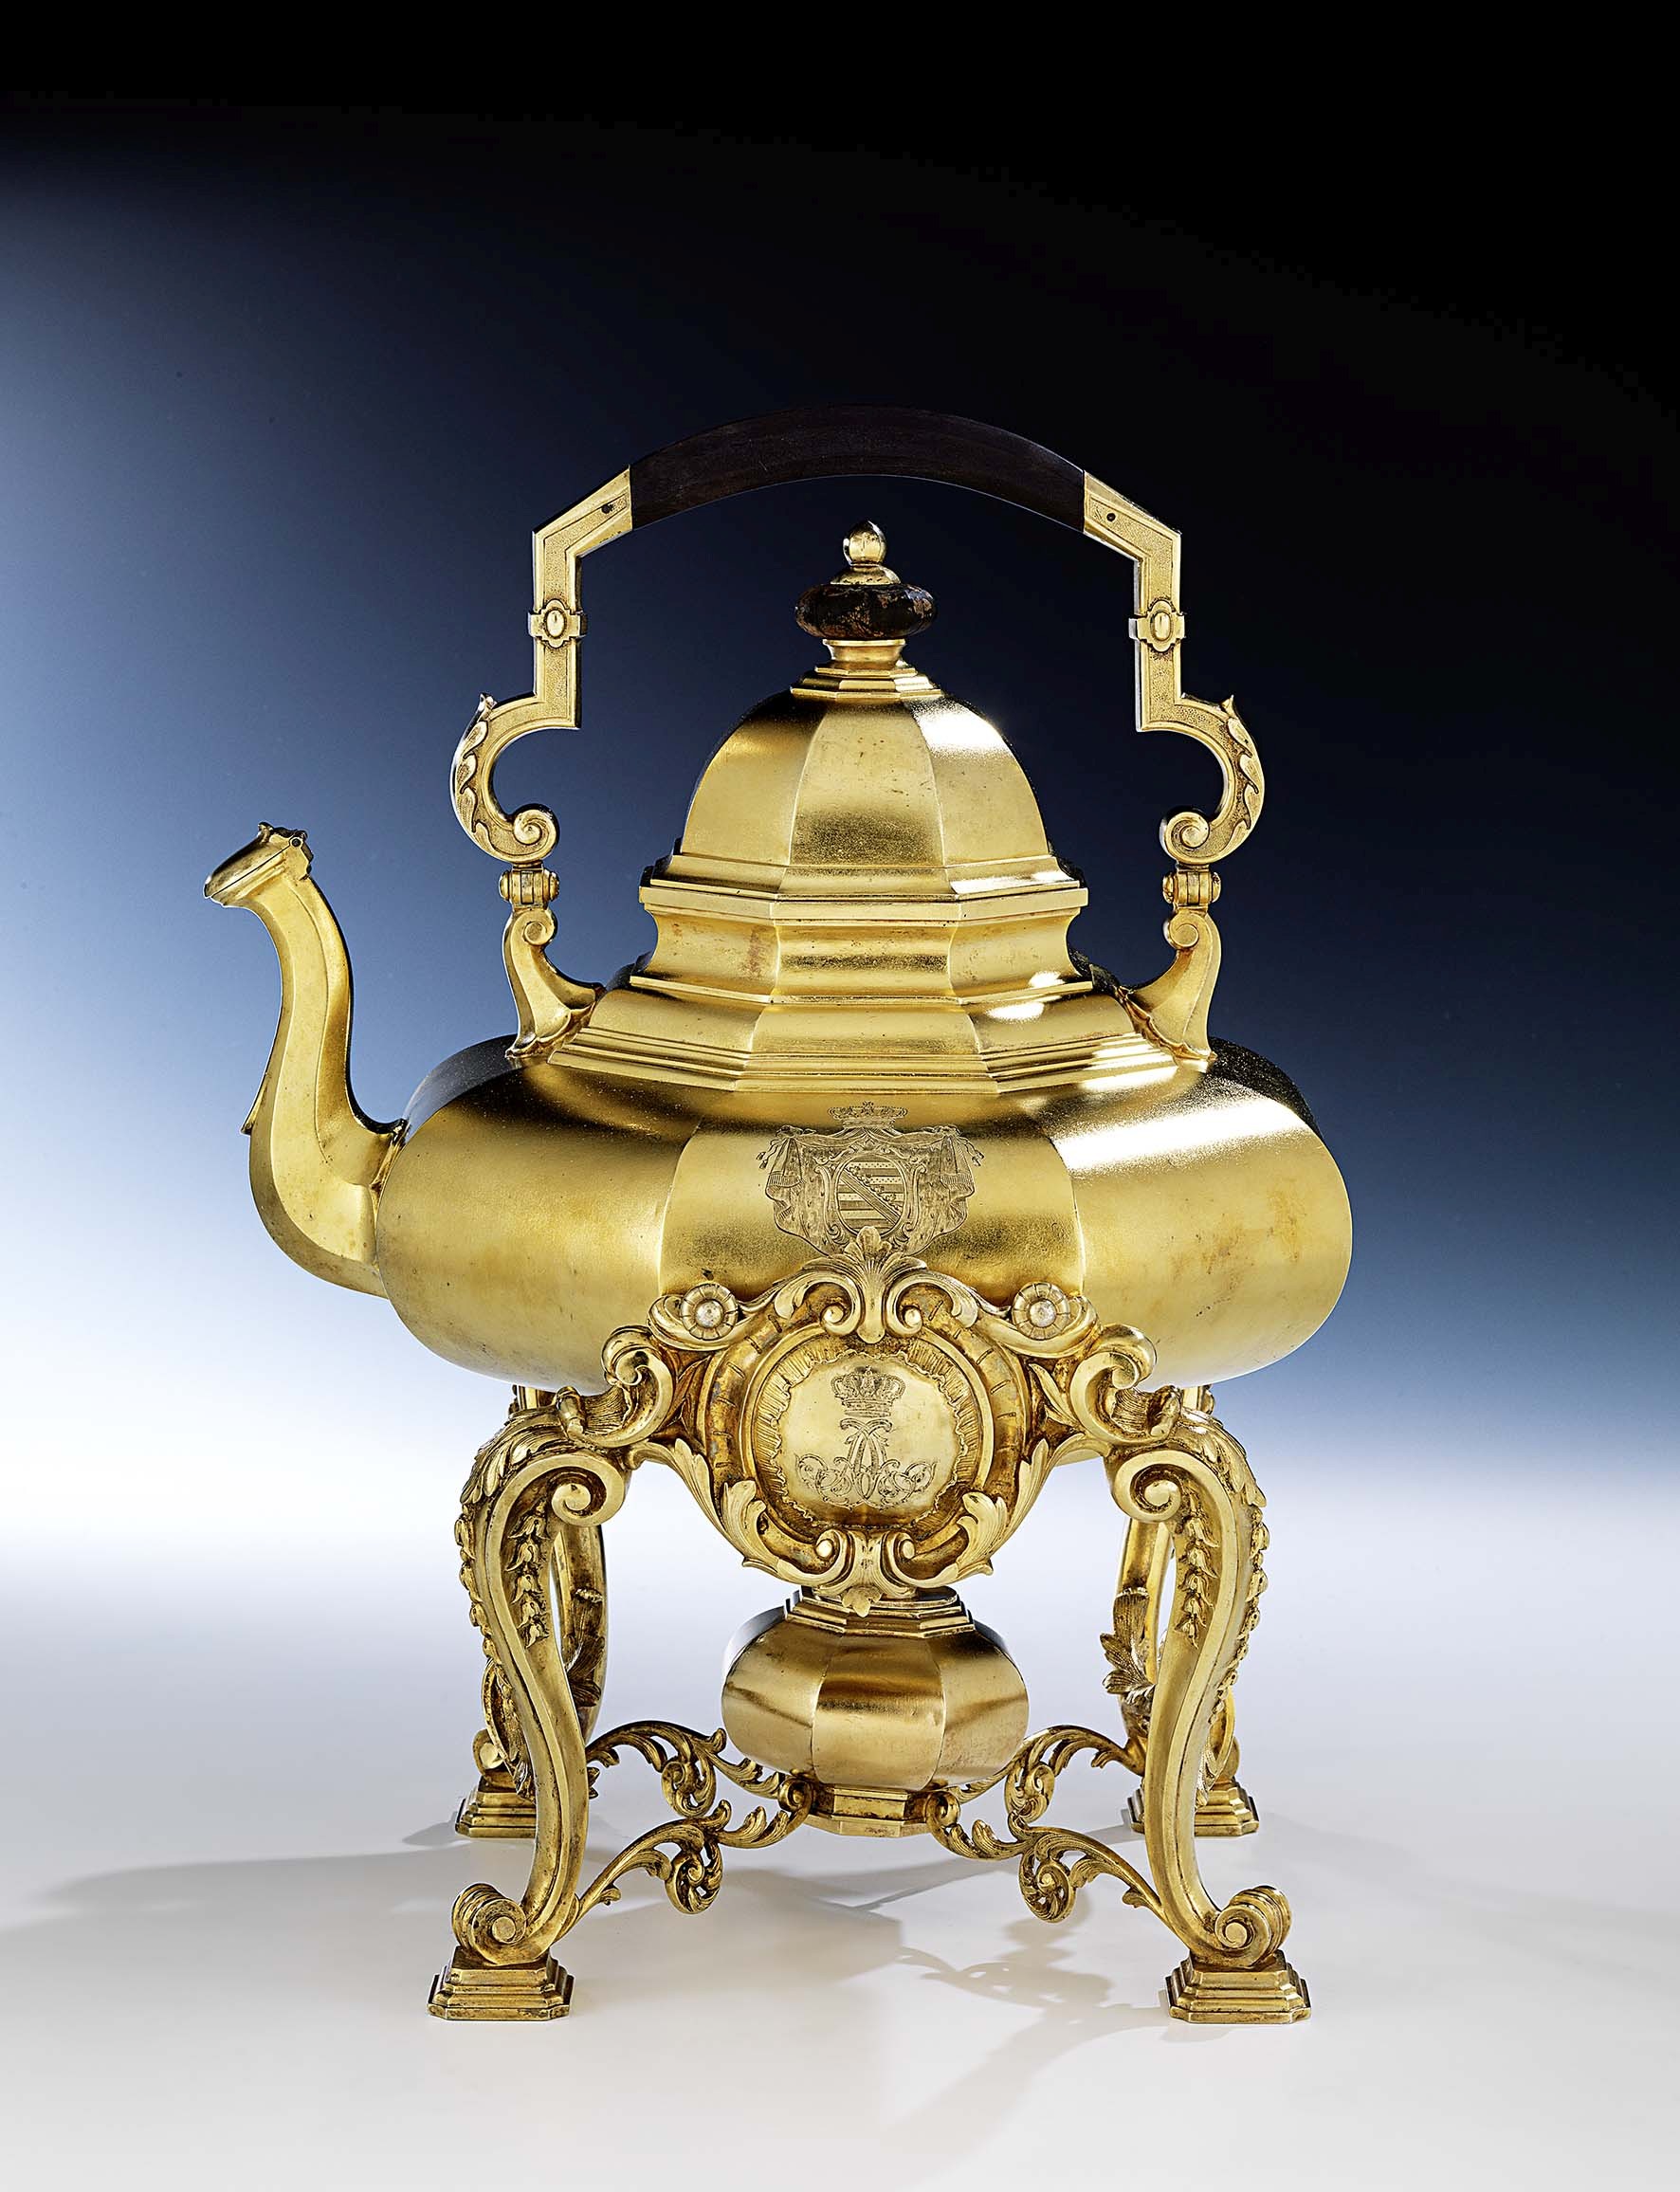 Large vermeil water kettle and chafing stand, Eckert, 1885. Photo courtesy Hampel Fine Art Auctions, Munich